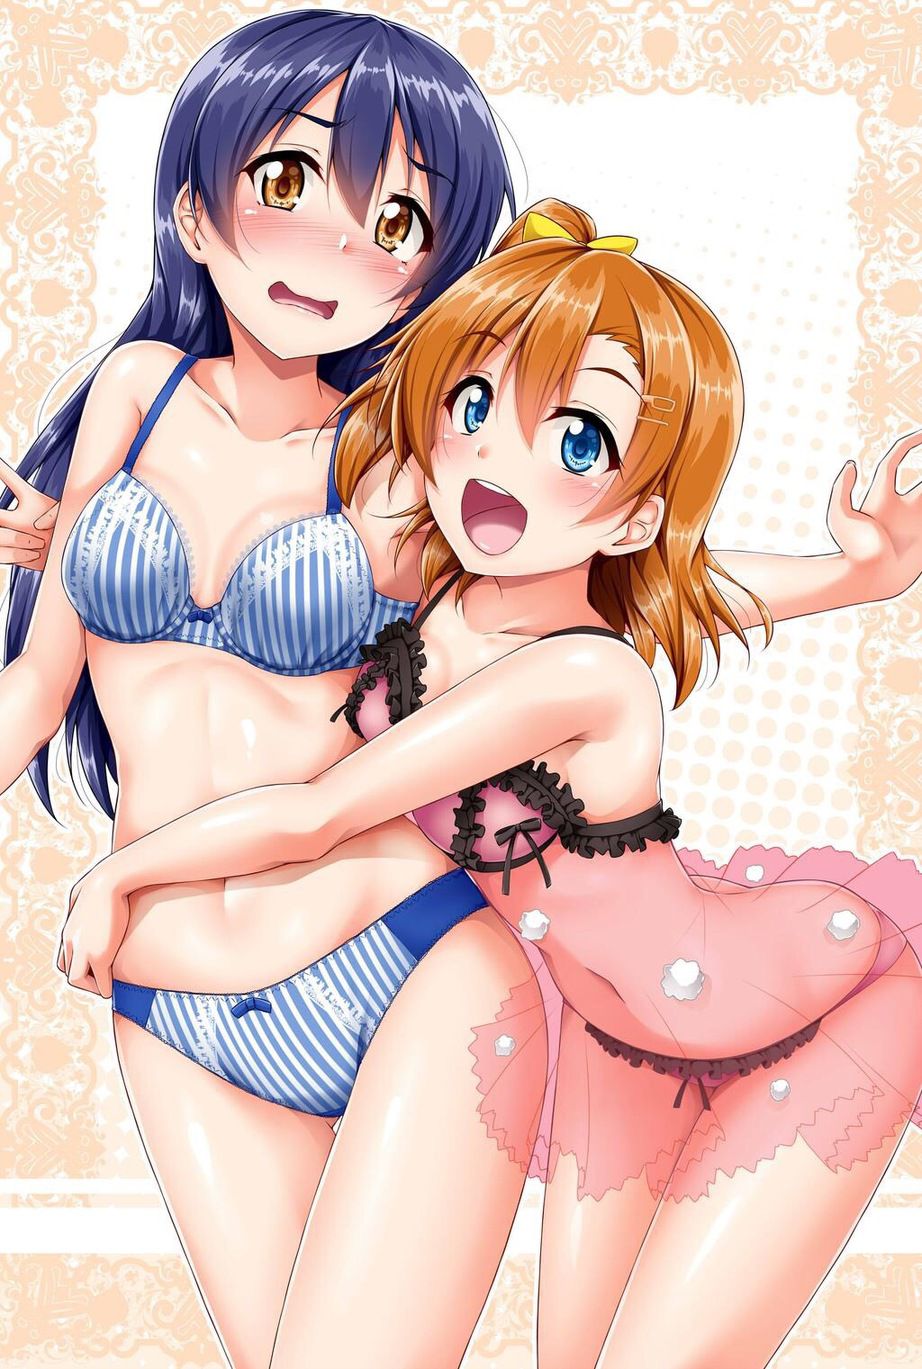 [the second image] the girl who shows most cute eroticism by a love live 4